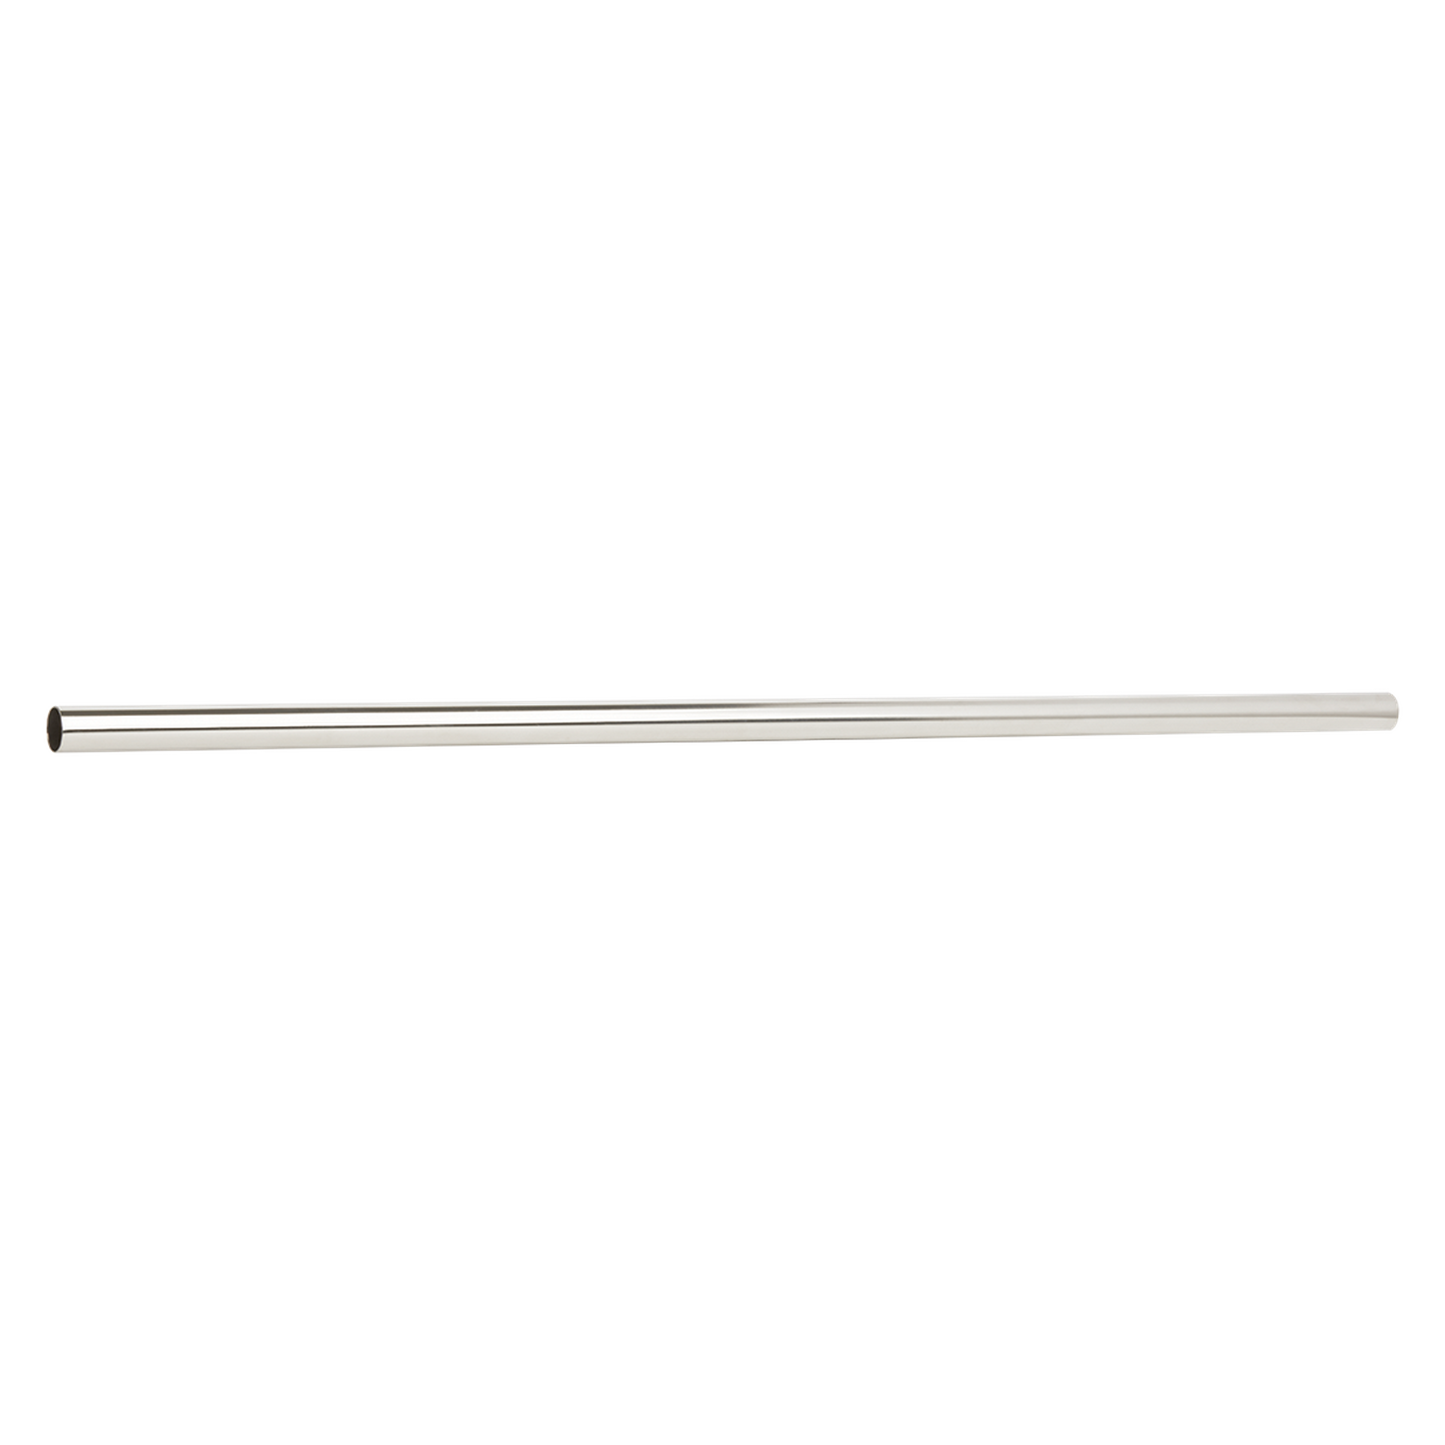 Seachrome Signature Series 60" Polished Stainless Steel 18 Gauge Straight Shower Rod